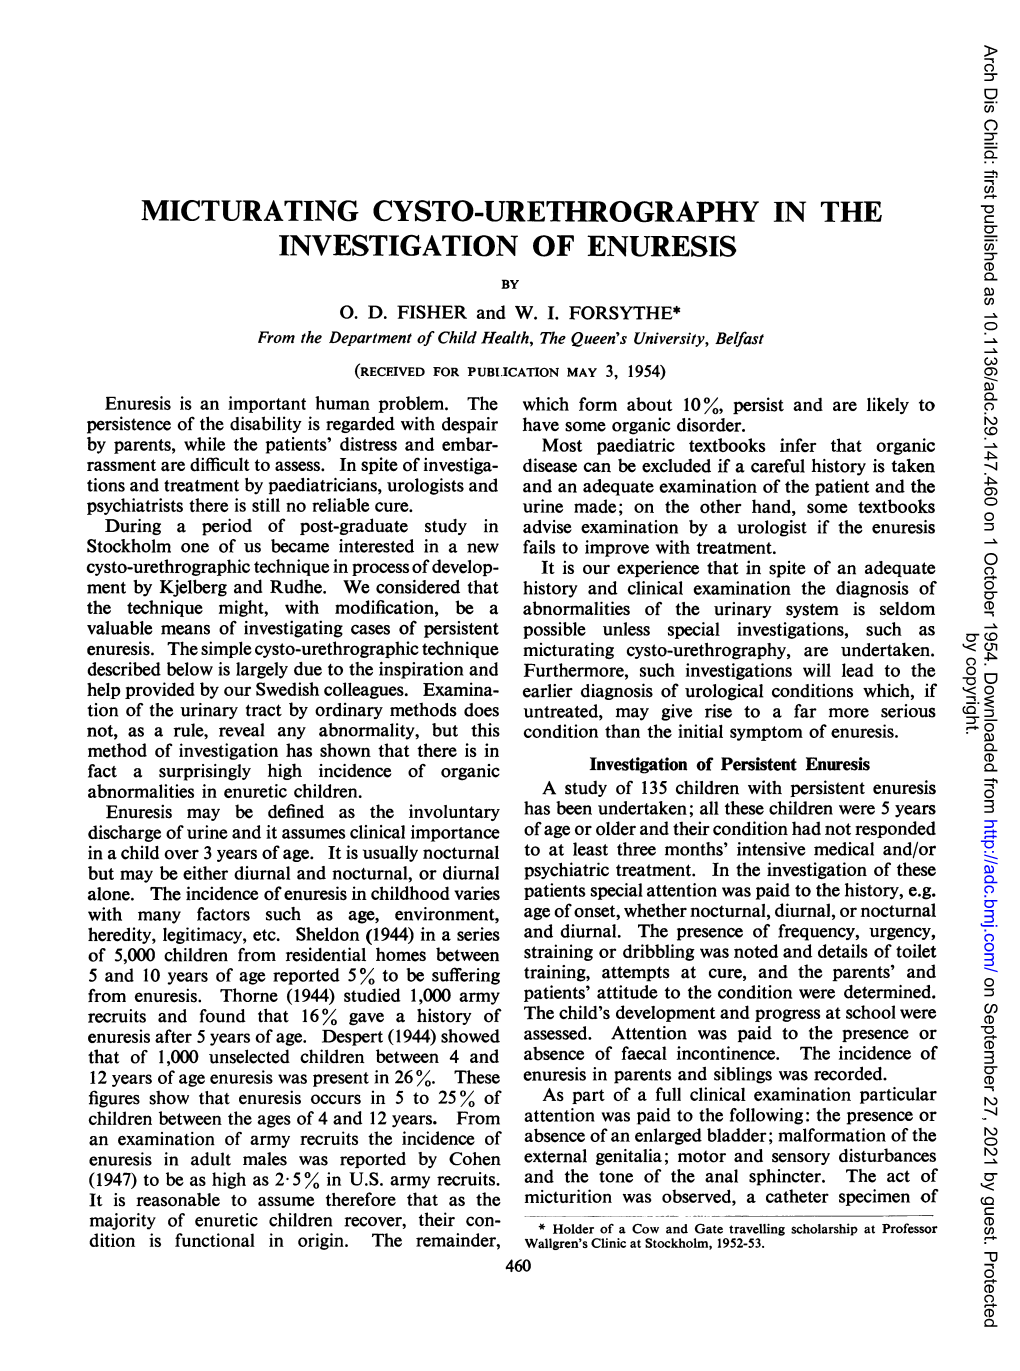 Micturating Cysto-Urethrography in the Investigation of Enuresis by 0